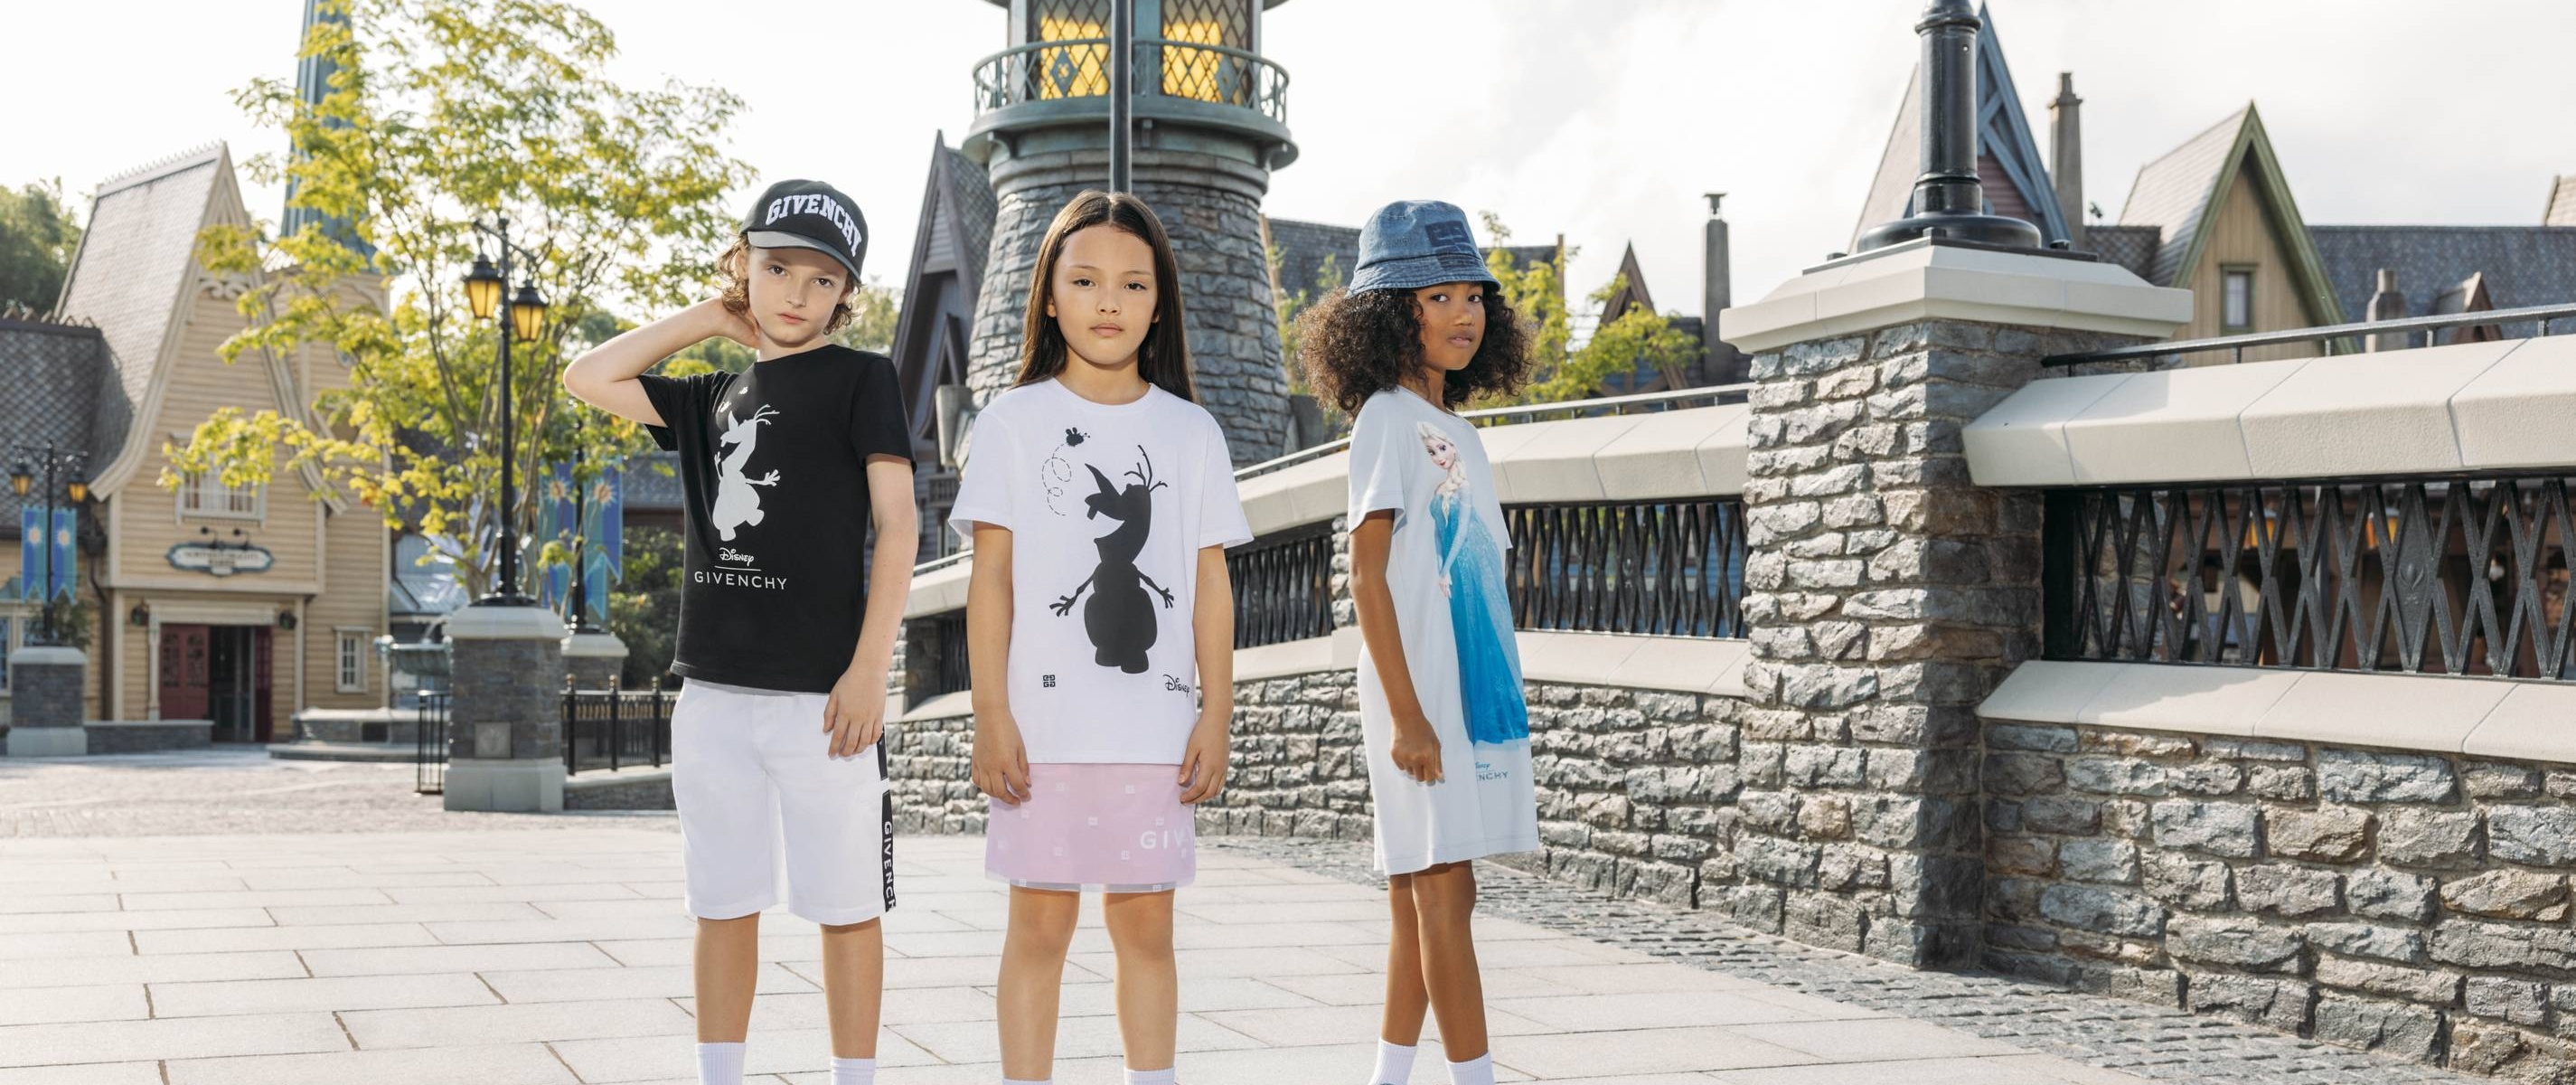 Givenchy Teams With Disney On 'Frozen' Kids Collection